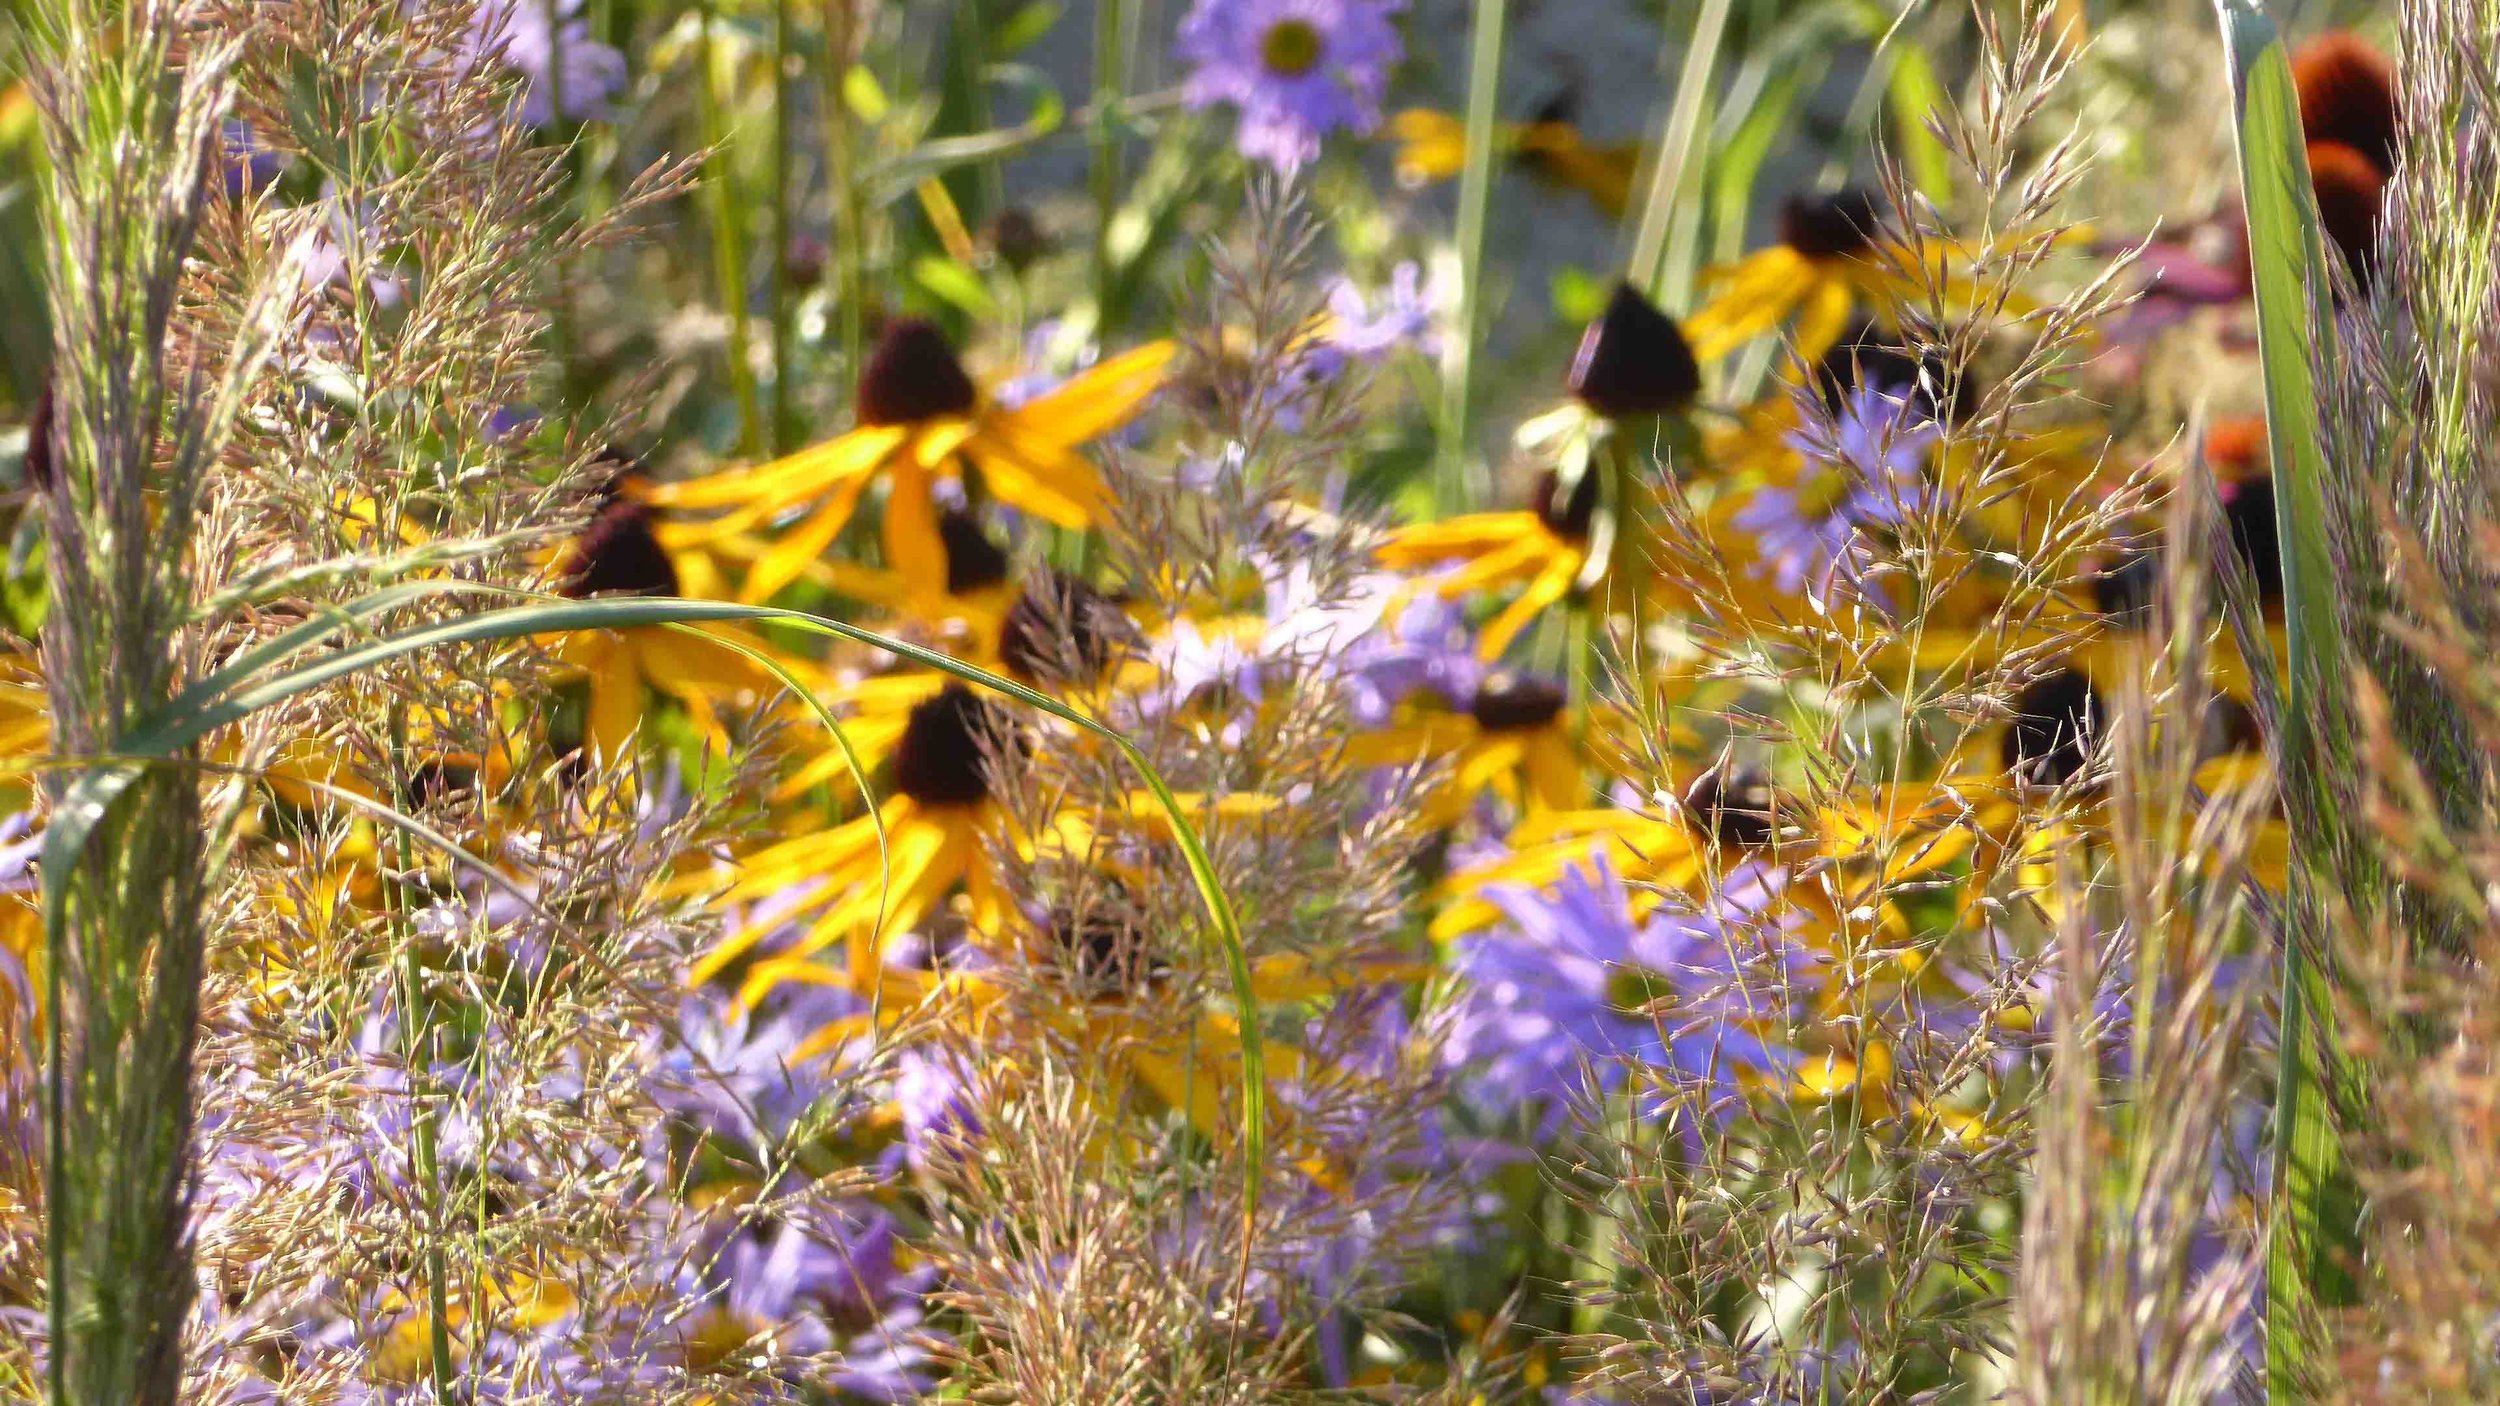 Cheshire Garden Design: The Sun and Shade Garden: Rudbeckias, Asters And Grasses